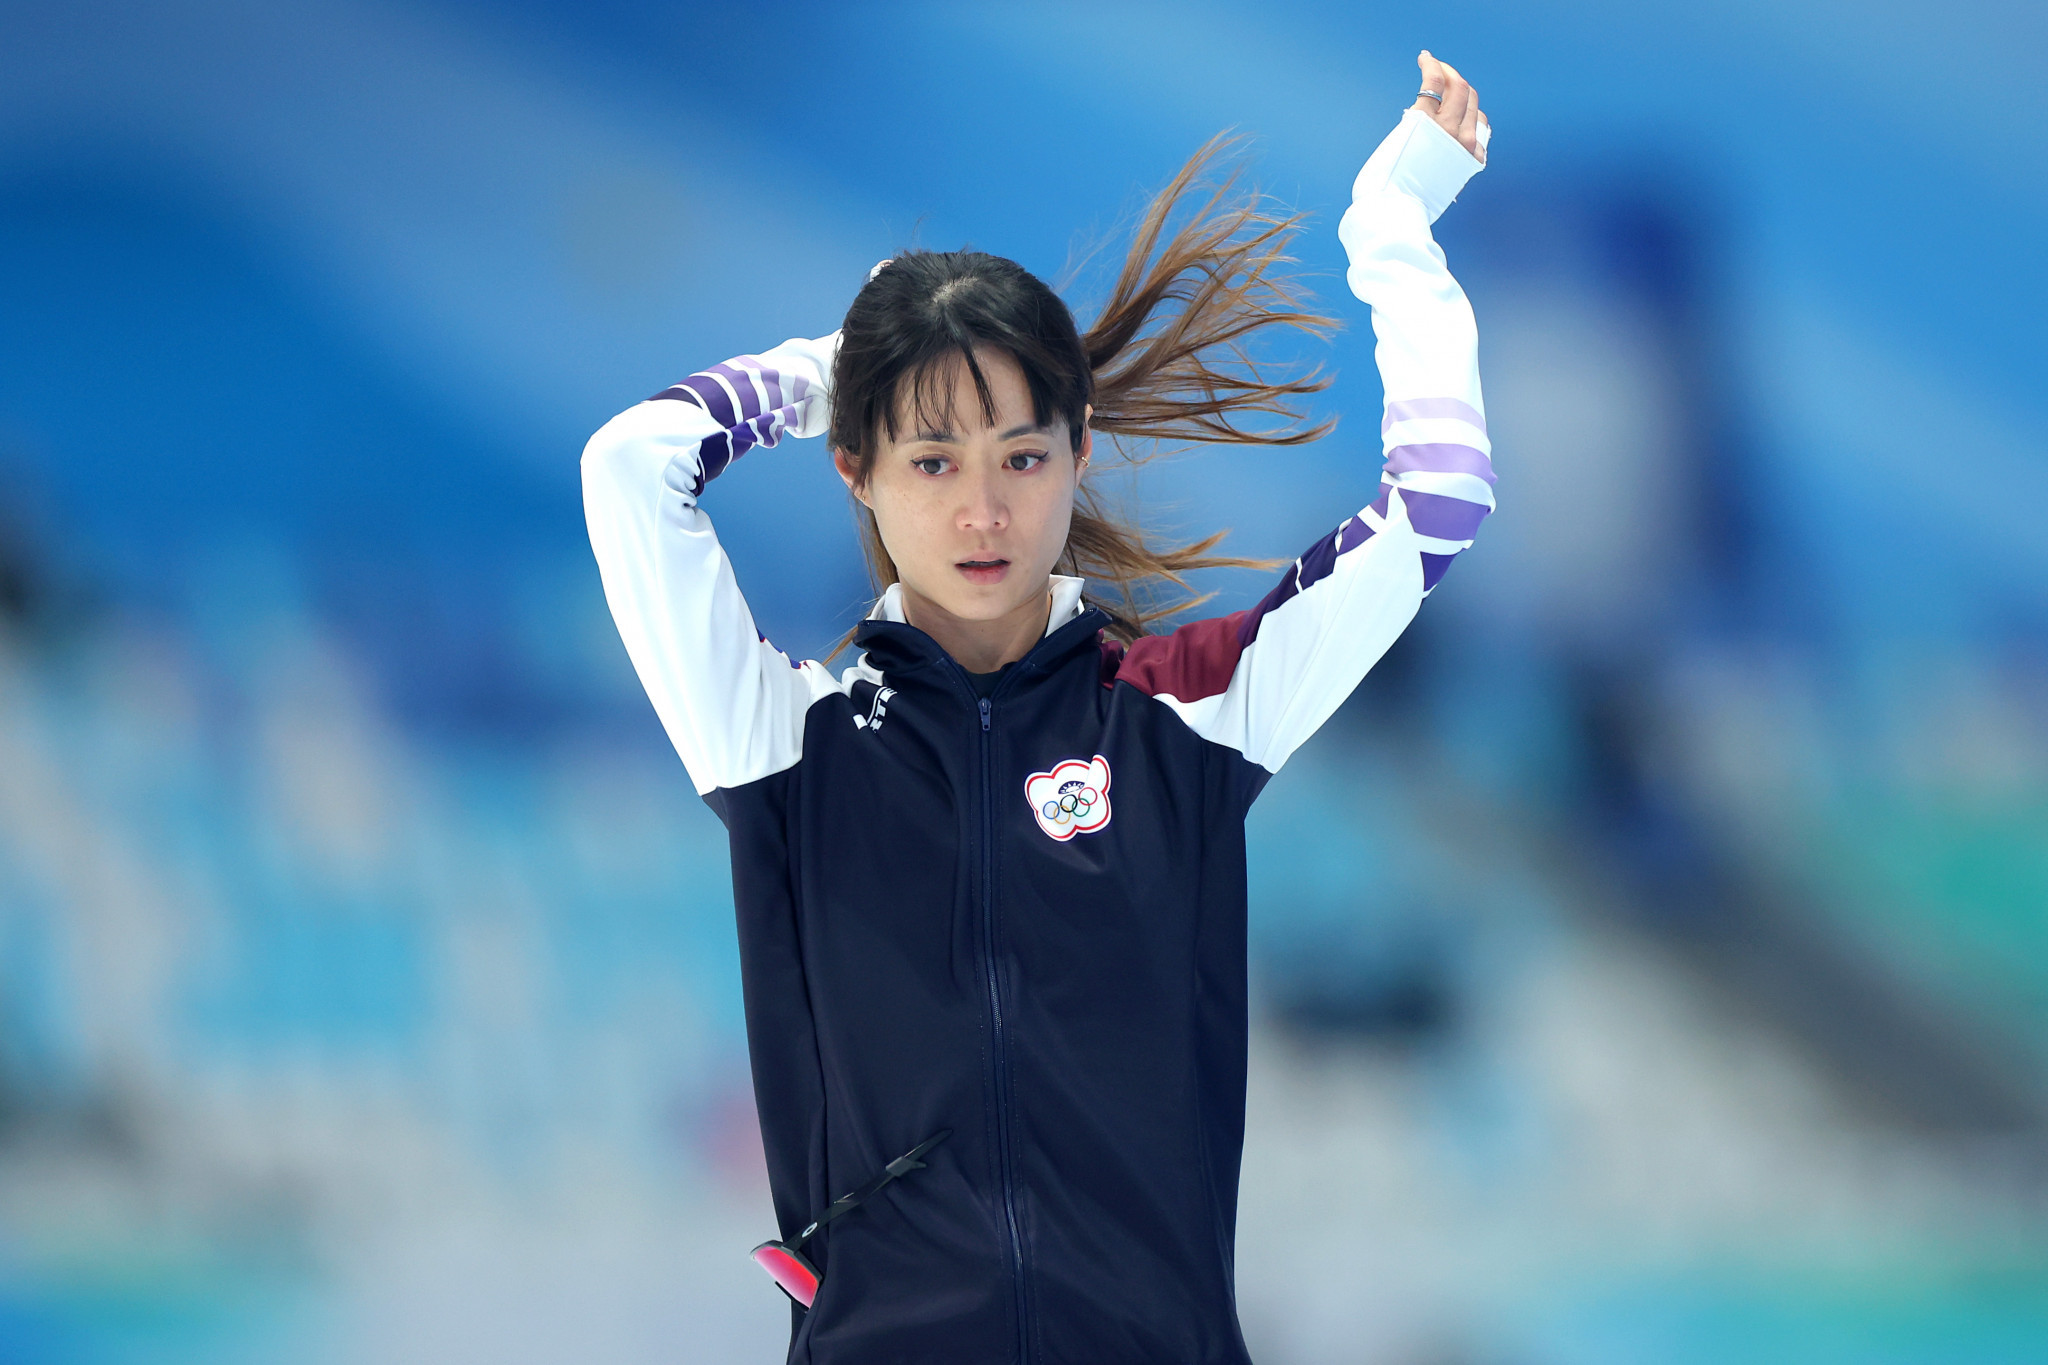 Taiwan removes funding from speed skater Huang after wearing Chinese kit prior to Beijing 2022